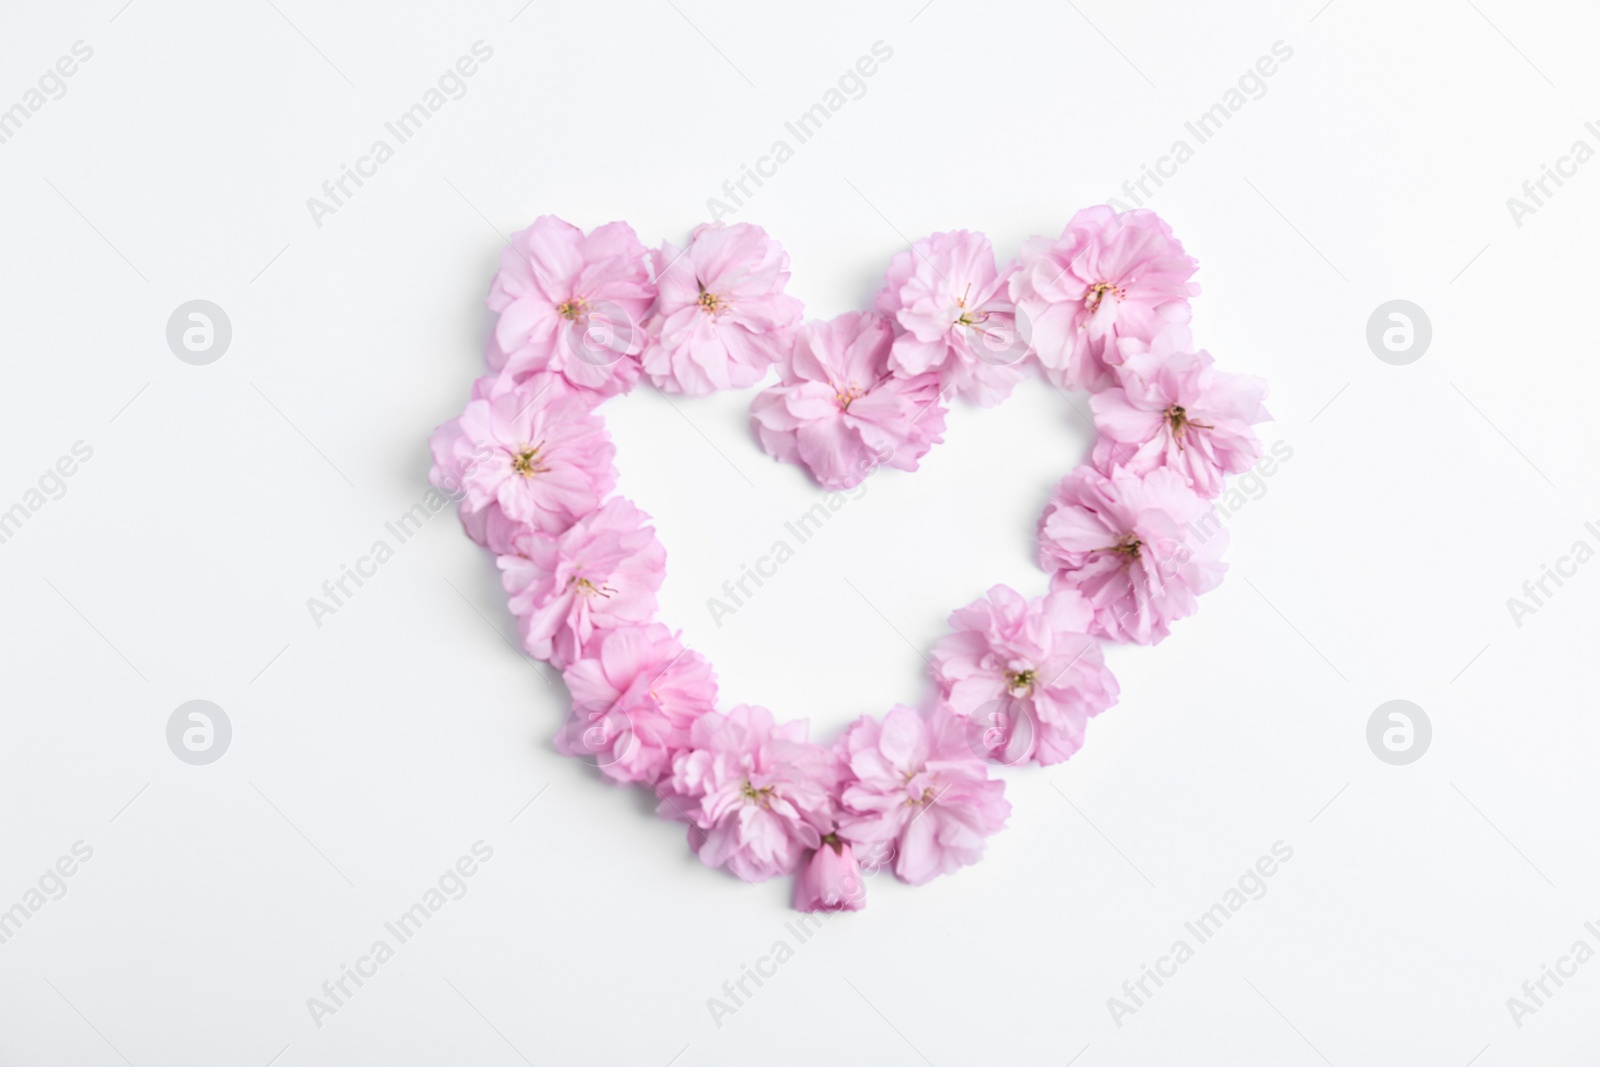 Photo of Heart made with sakura blossom on white background, top view. Japanese cherry